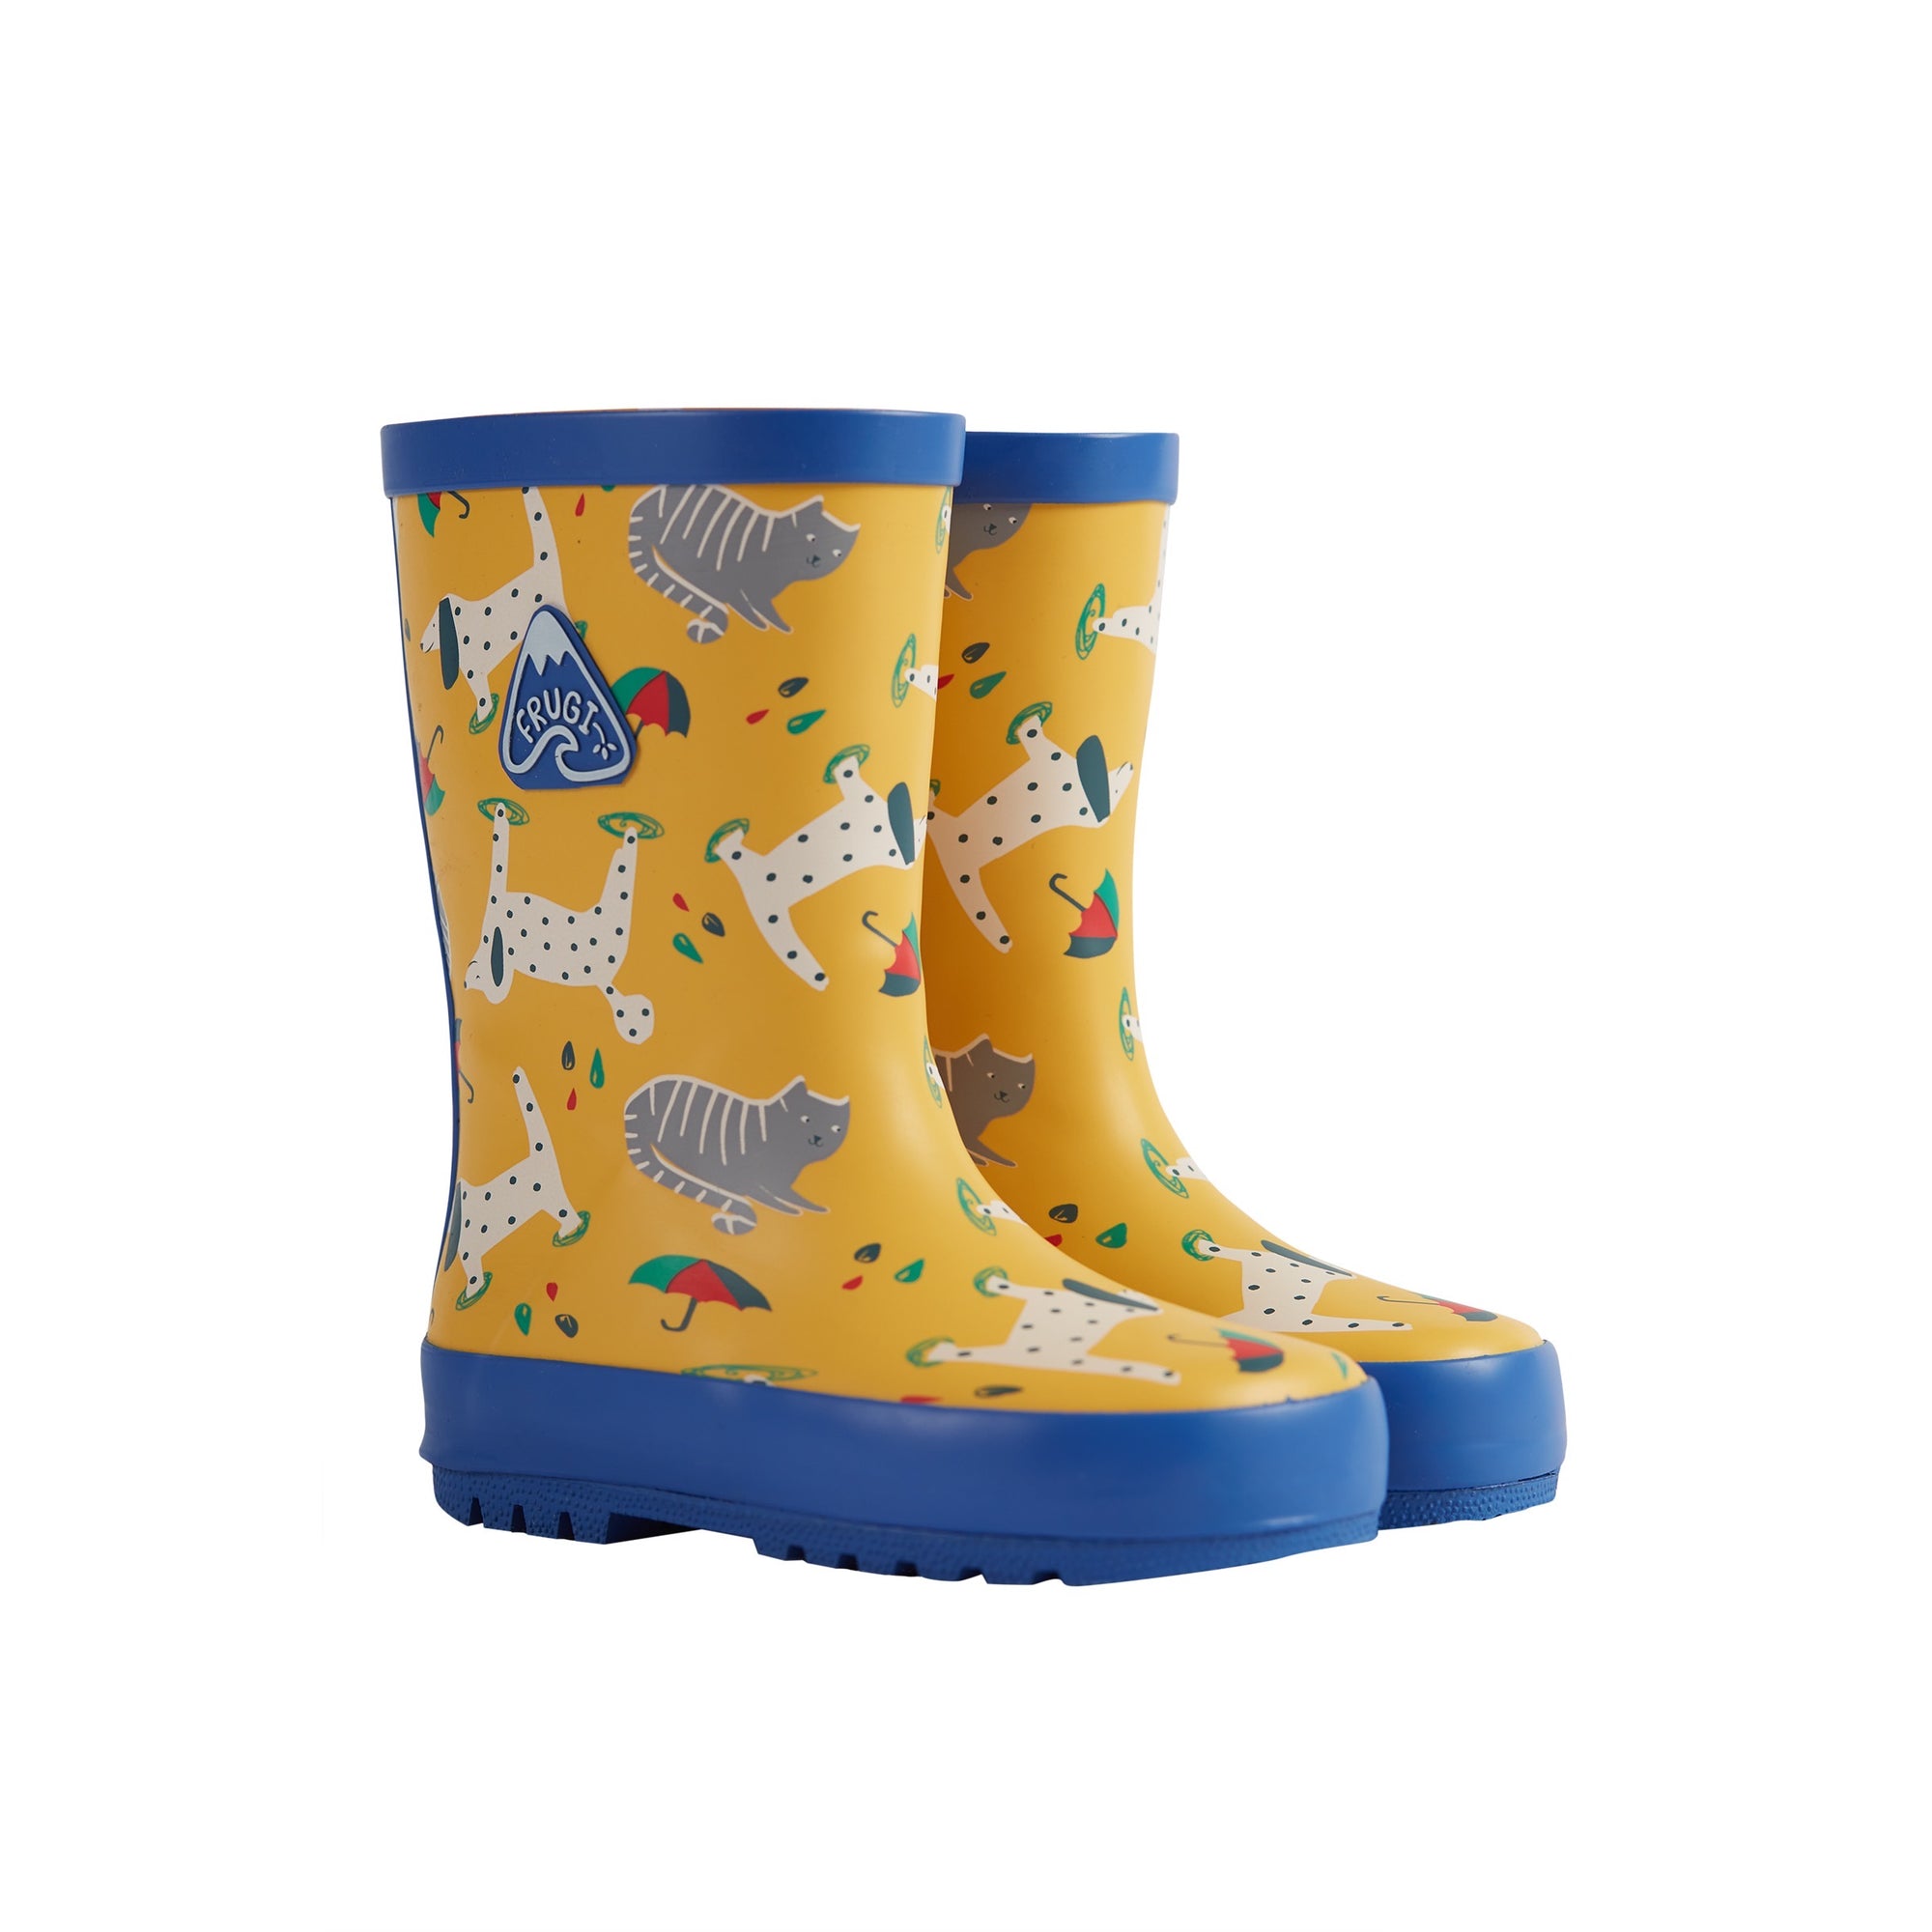 Frugi Wellingtons Yellow Puddle Paws Footwear UK4 INFANT / Yellow,UK5 INFANT / Yellow,UK6 INFANT / Yellow,UK7 INFANT / Yellow,UK8 INFANT / Yellow,UK9 KIDS / Yellow,UK10 KIDS / Yellow,UK11 KIDS / Yellow,UK12 KIDS / Yellow,UK13 KIDS / Yellow,UK1 KIDS / Yellow,UK2 KIDS / Yellow